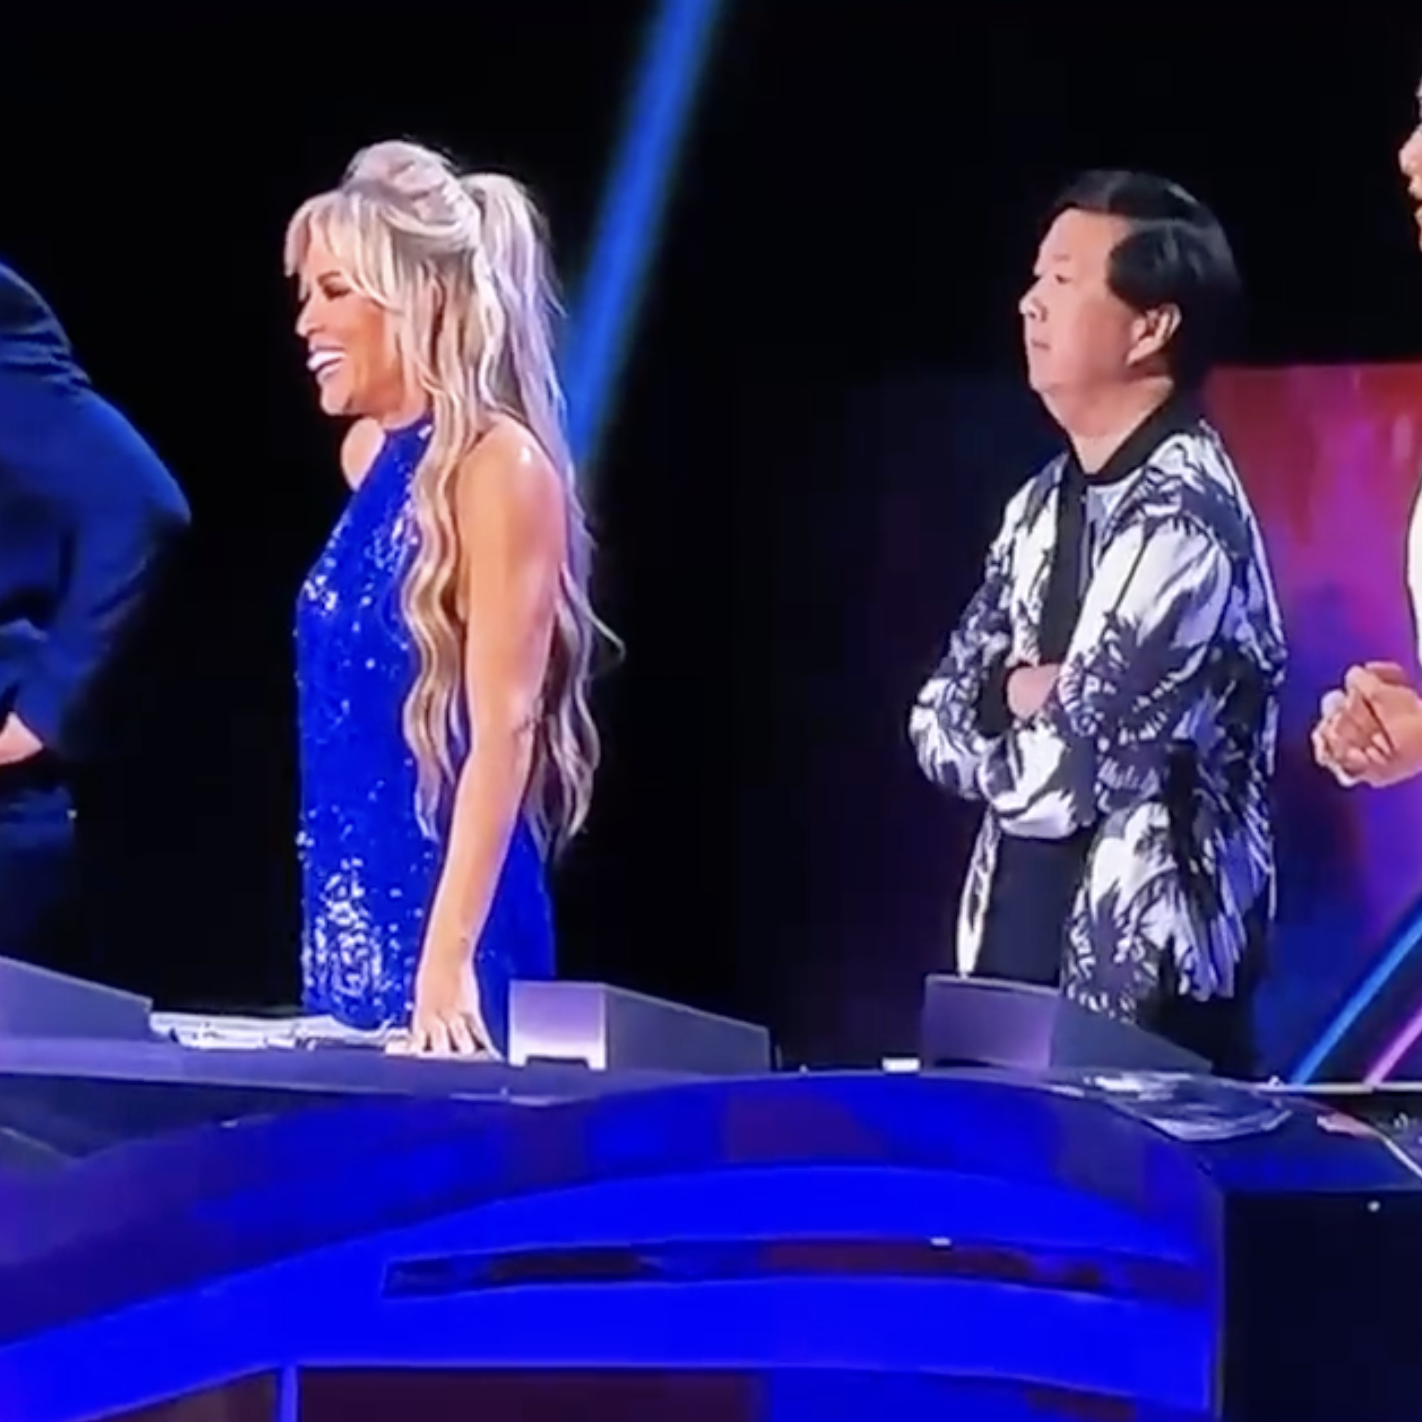 Watch Ken Jeong Walk Off Set After Rudy Giuliani Is Revealed on ‘The Masked Singer’